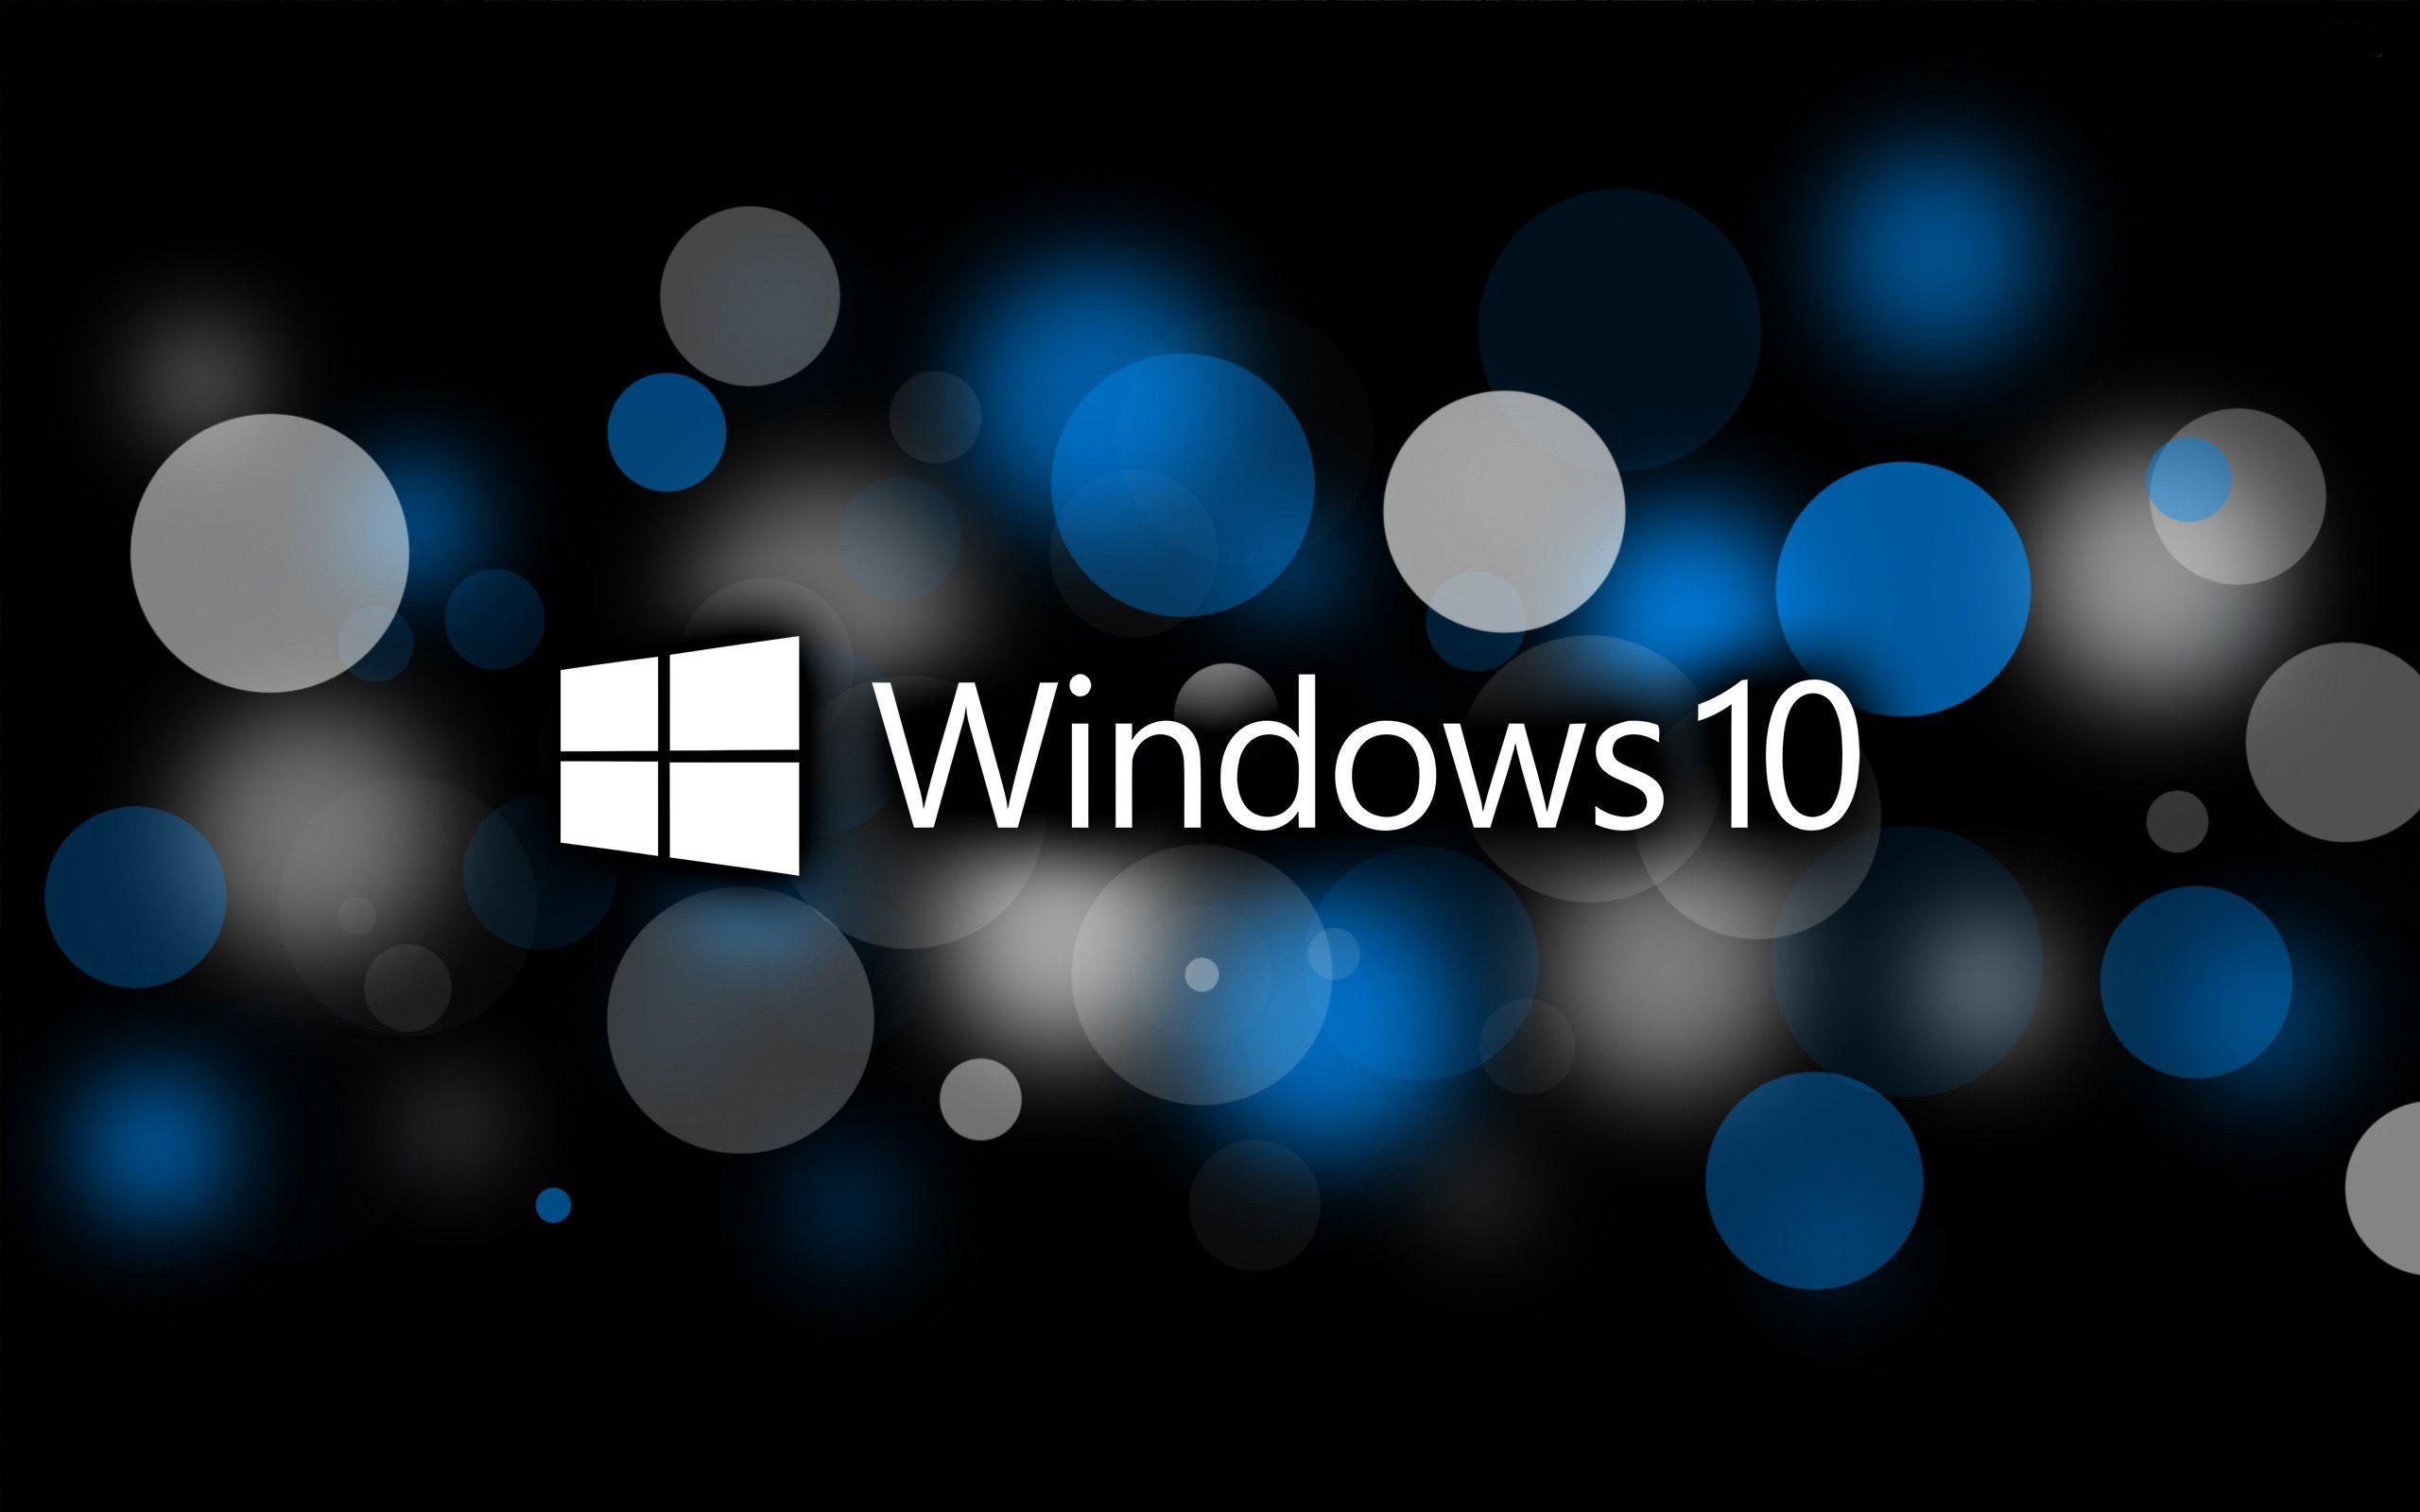 Win 10 Wallpaper Free, 38 Win 10 Photo and Picture, RT14 High